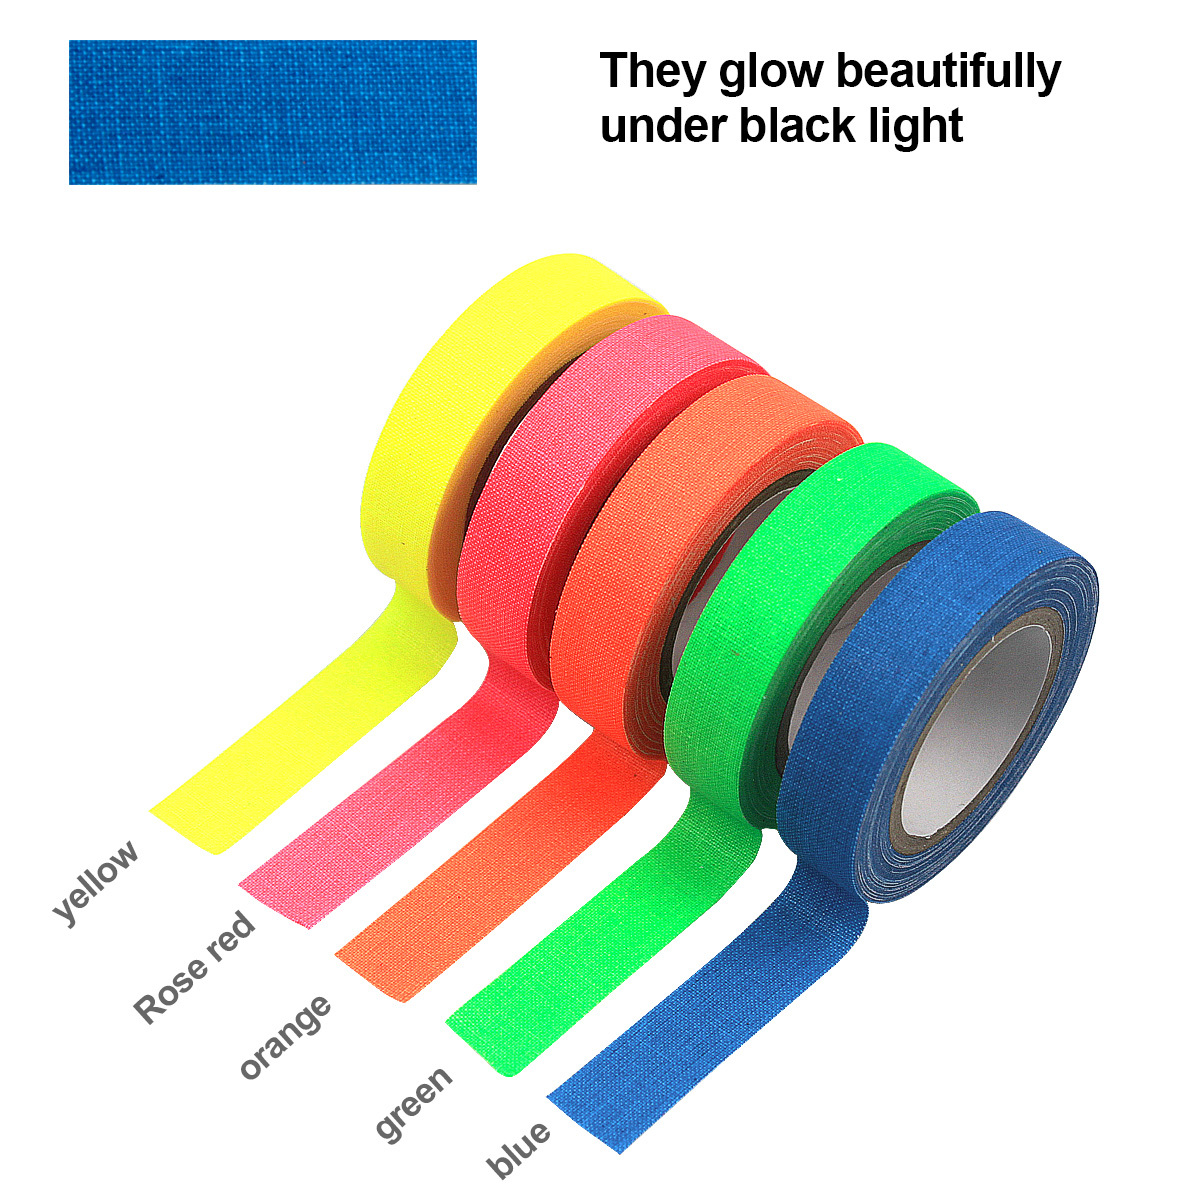 5 Rolls Fluorescent Cloth Tape 12.7mm X 5m/0.6x196.9in Luminous Neon Gaffer  Tapes Self Adhesive UV Blacklight Reactive Spike Tape Glow In The Dark Lig